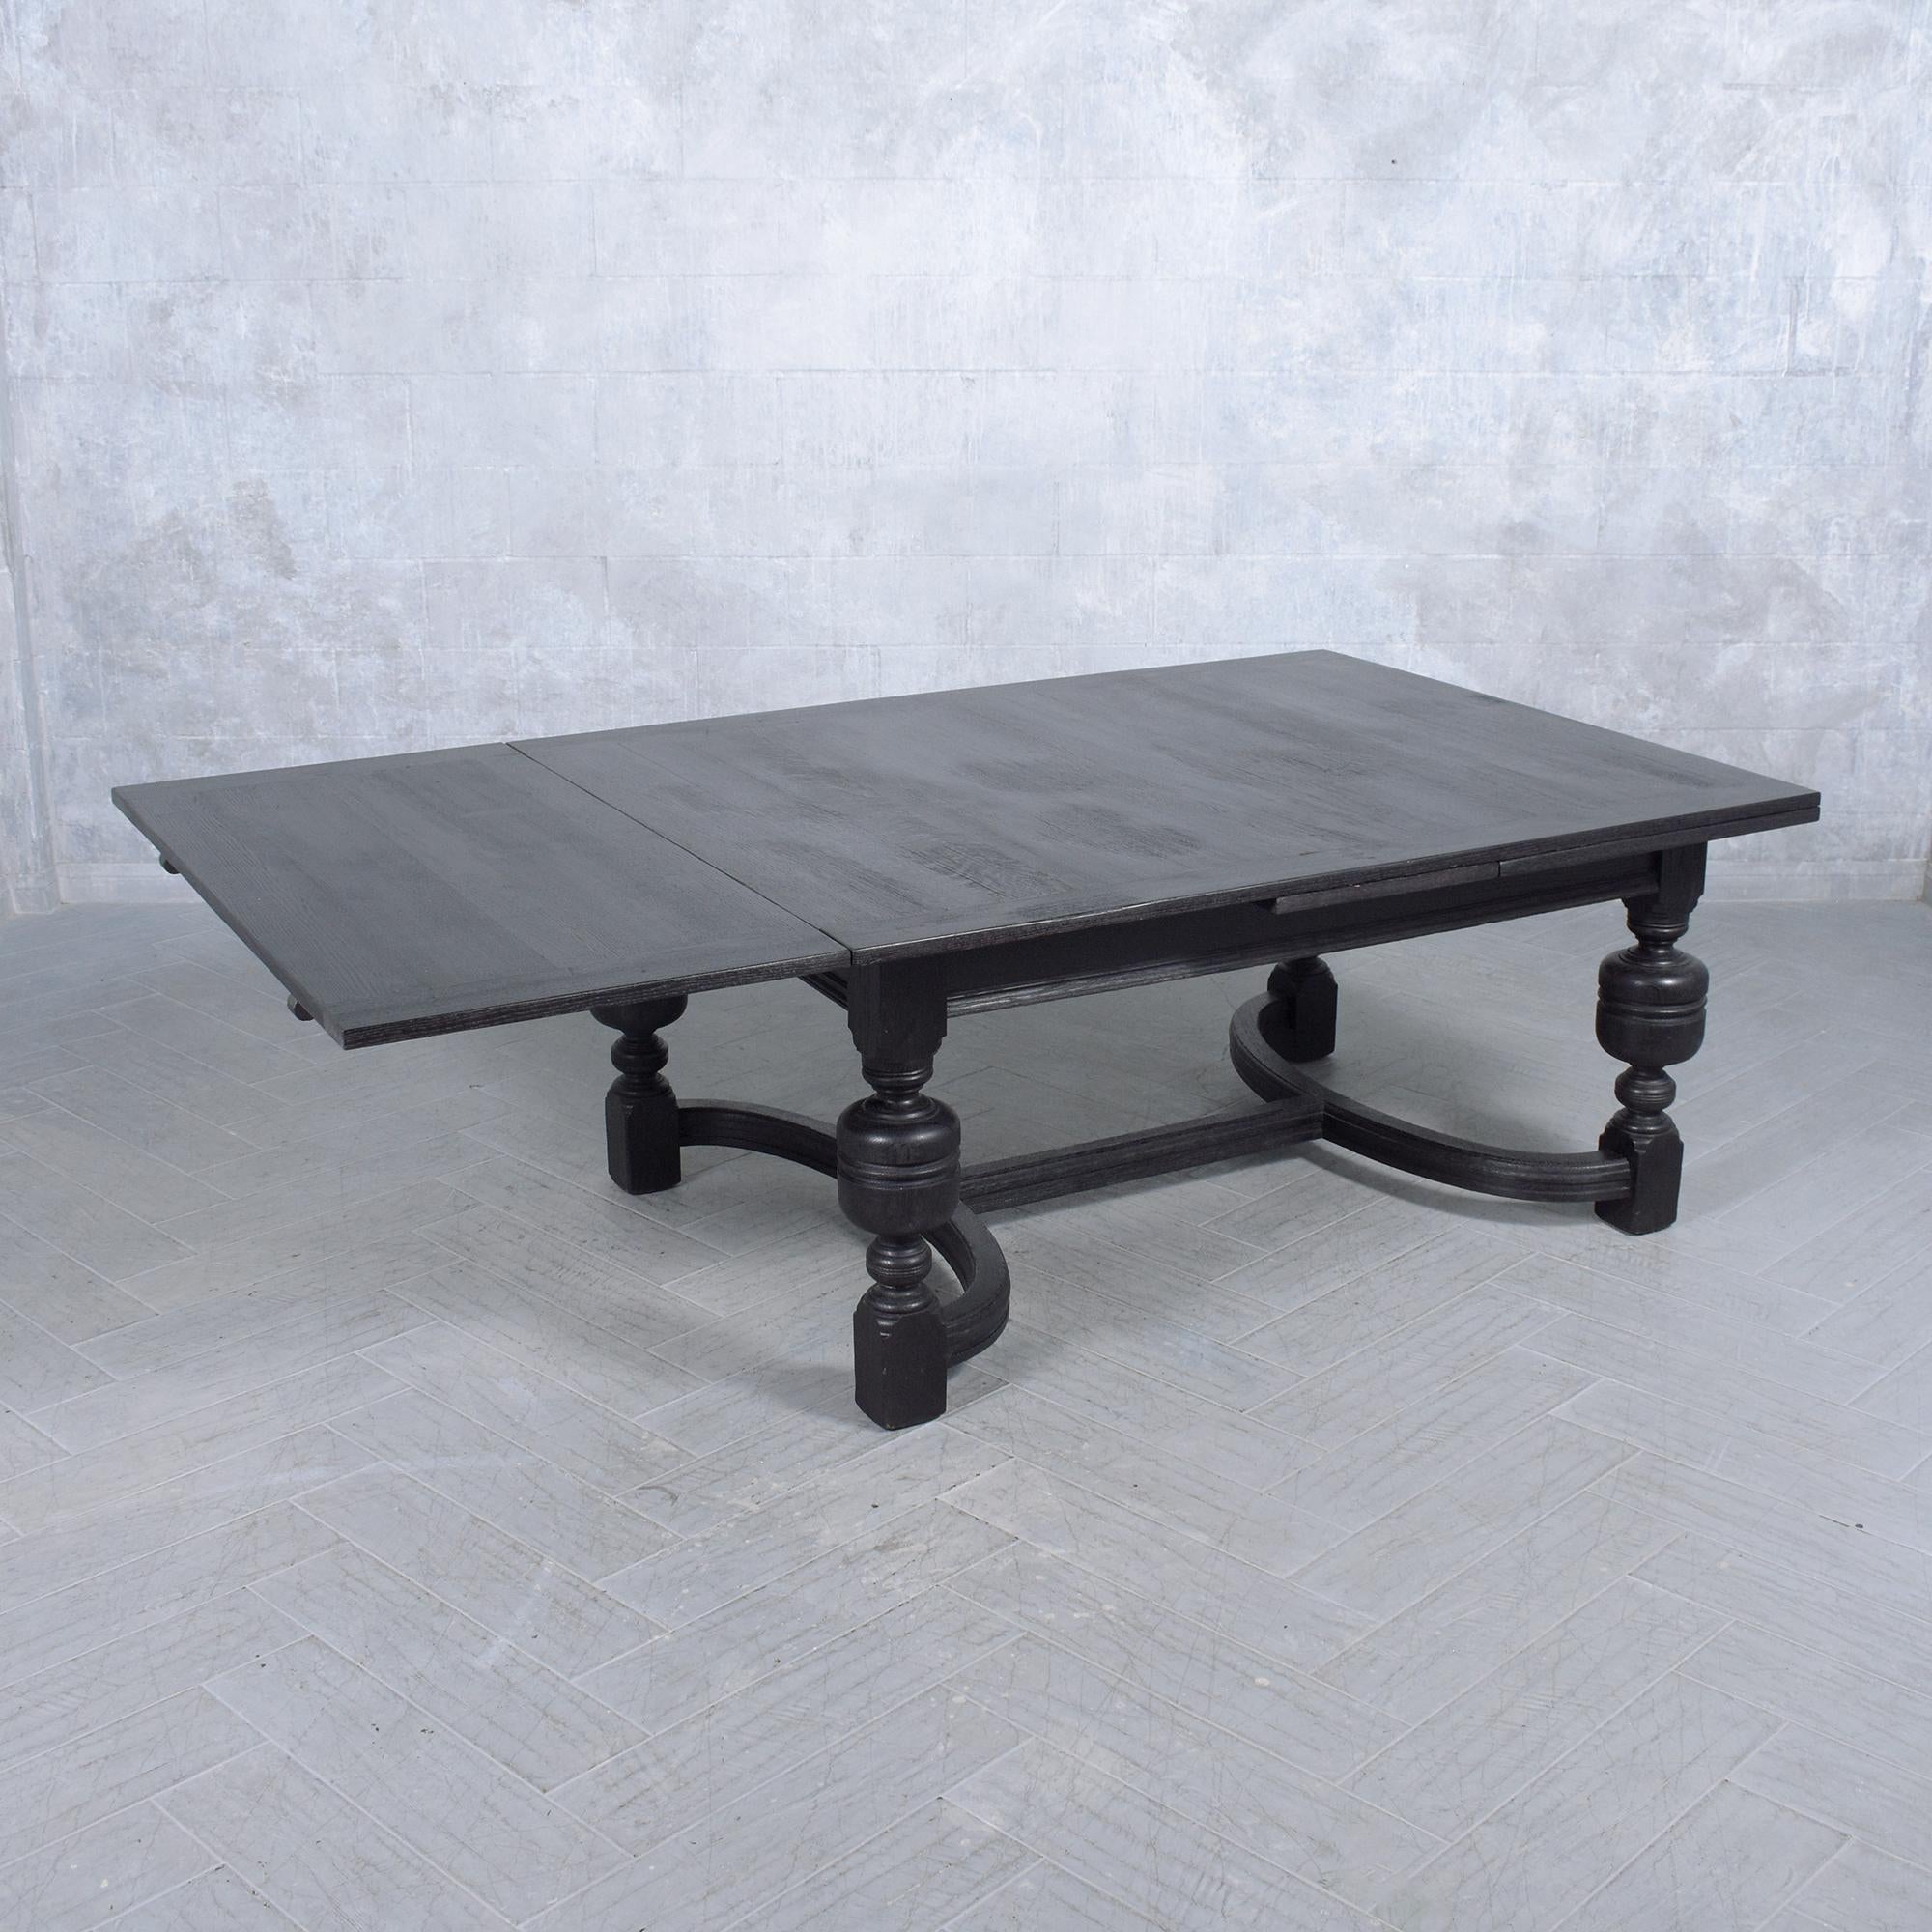 1850s Spanish Extendable Dining Table: Ebonized Solid Wood with French Design For Sale 2